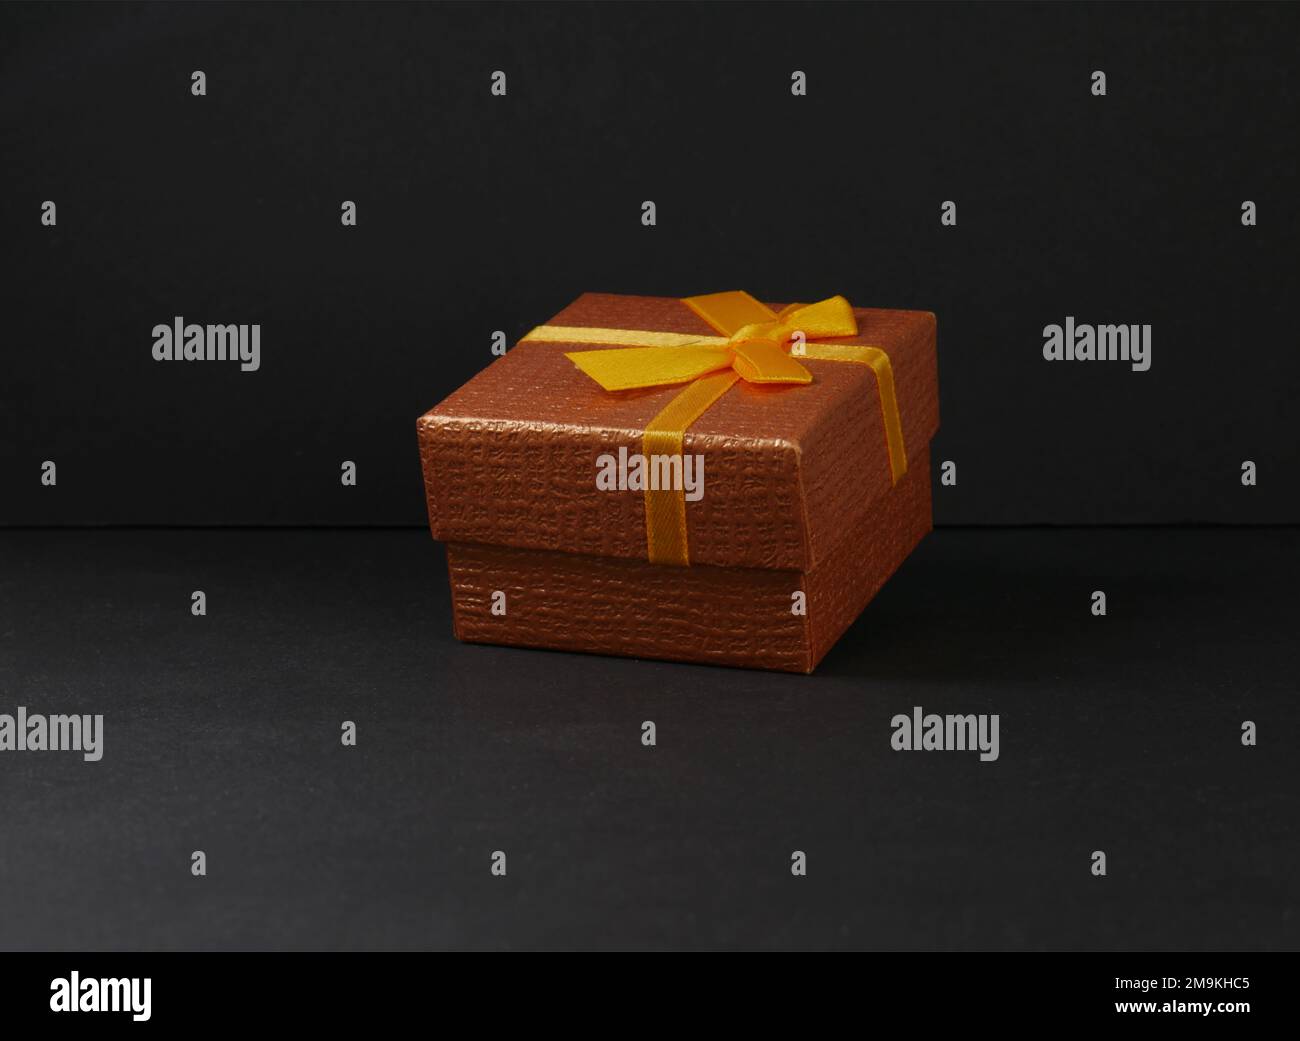 A Copper colored gift box with yellow bow on a black background. Stock Photo